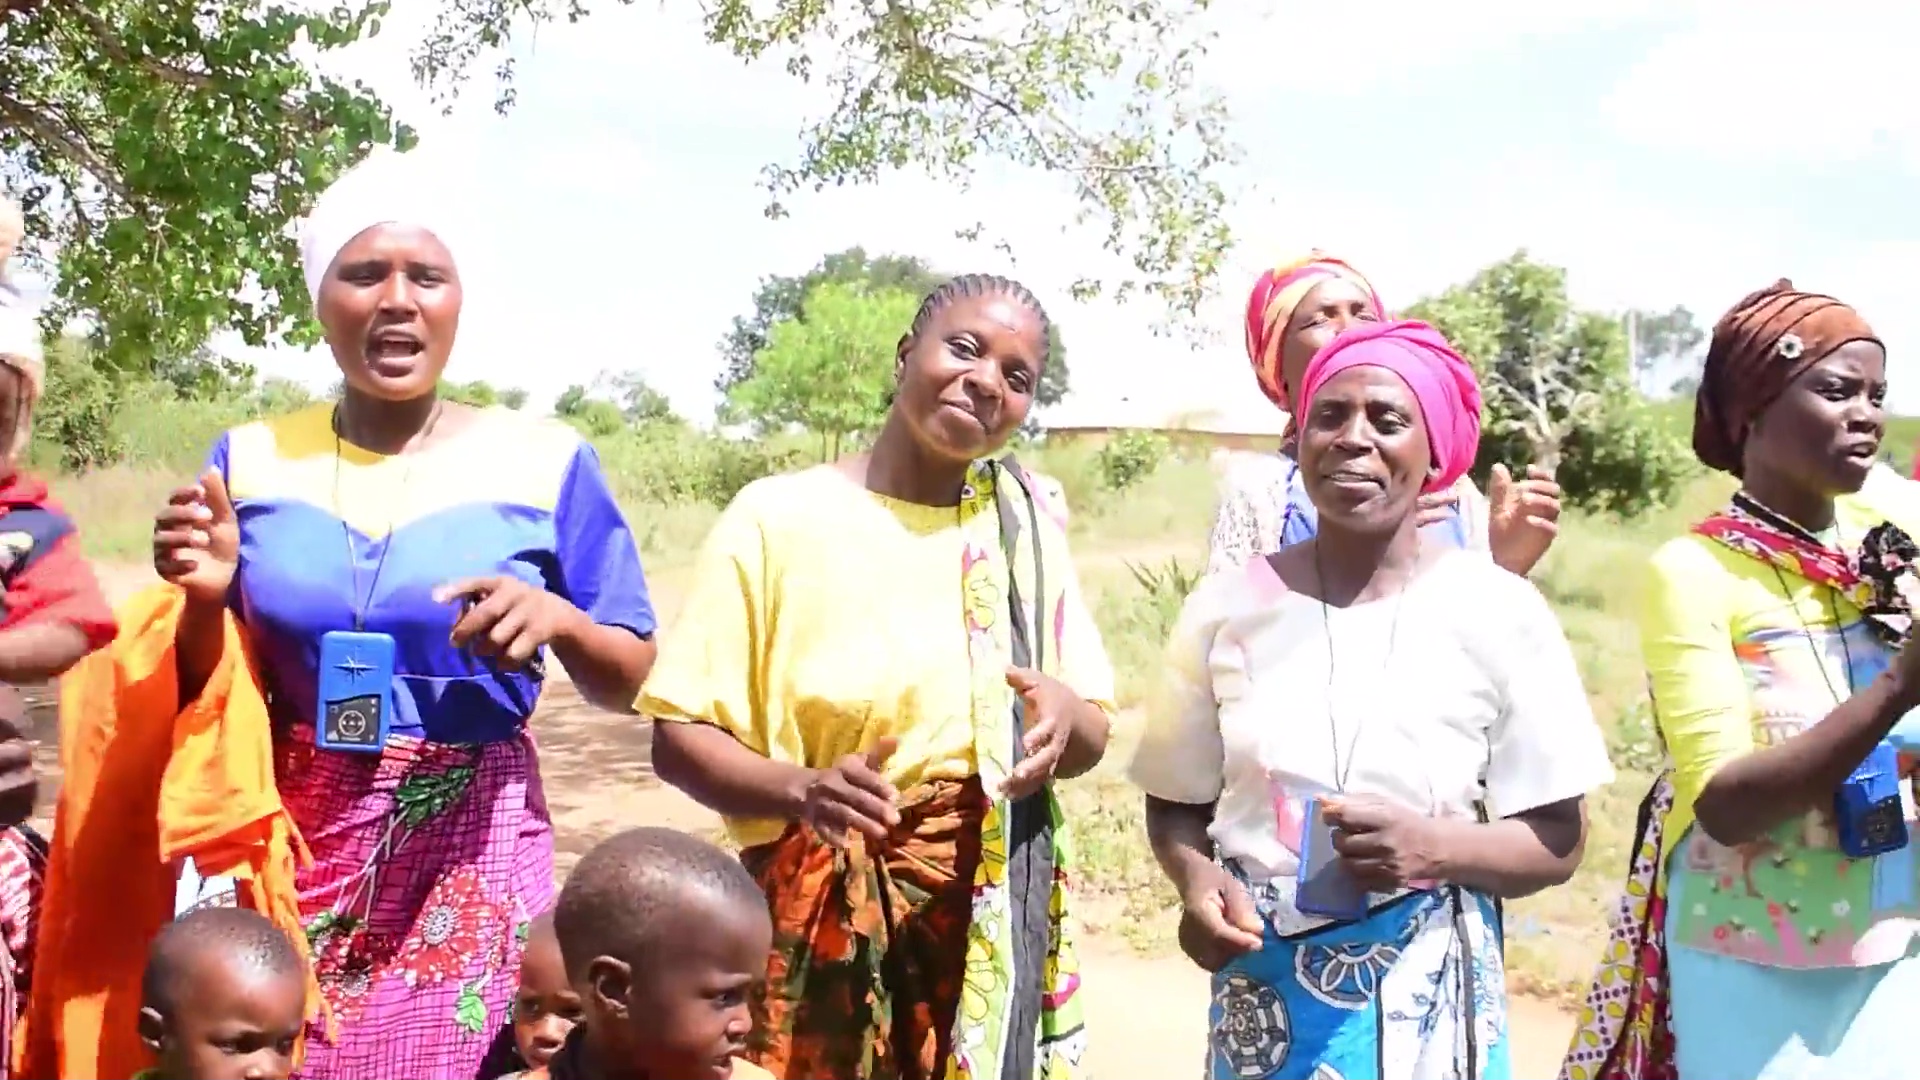 Lulu FM is helping Kenyan communities to access the power of the Gospel through distributing solar powered radios.